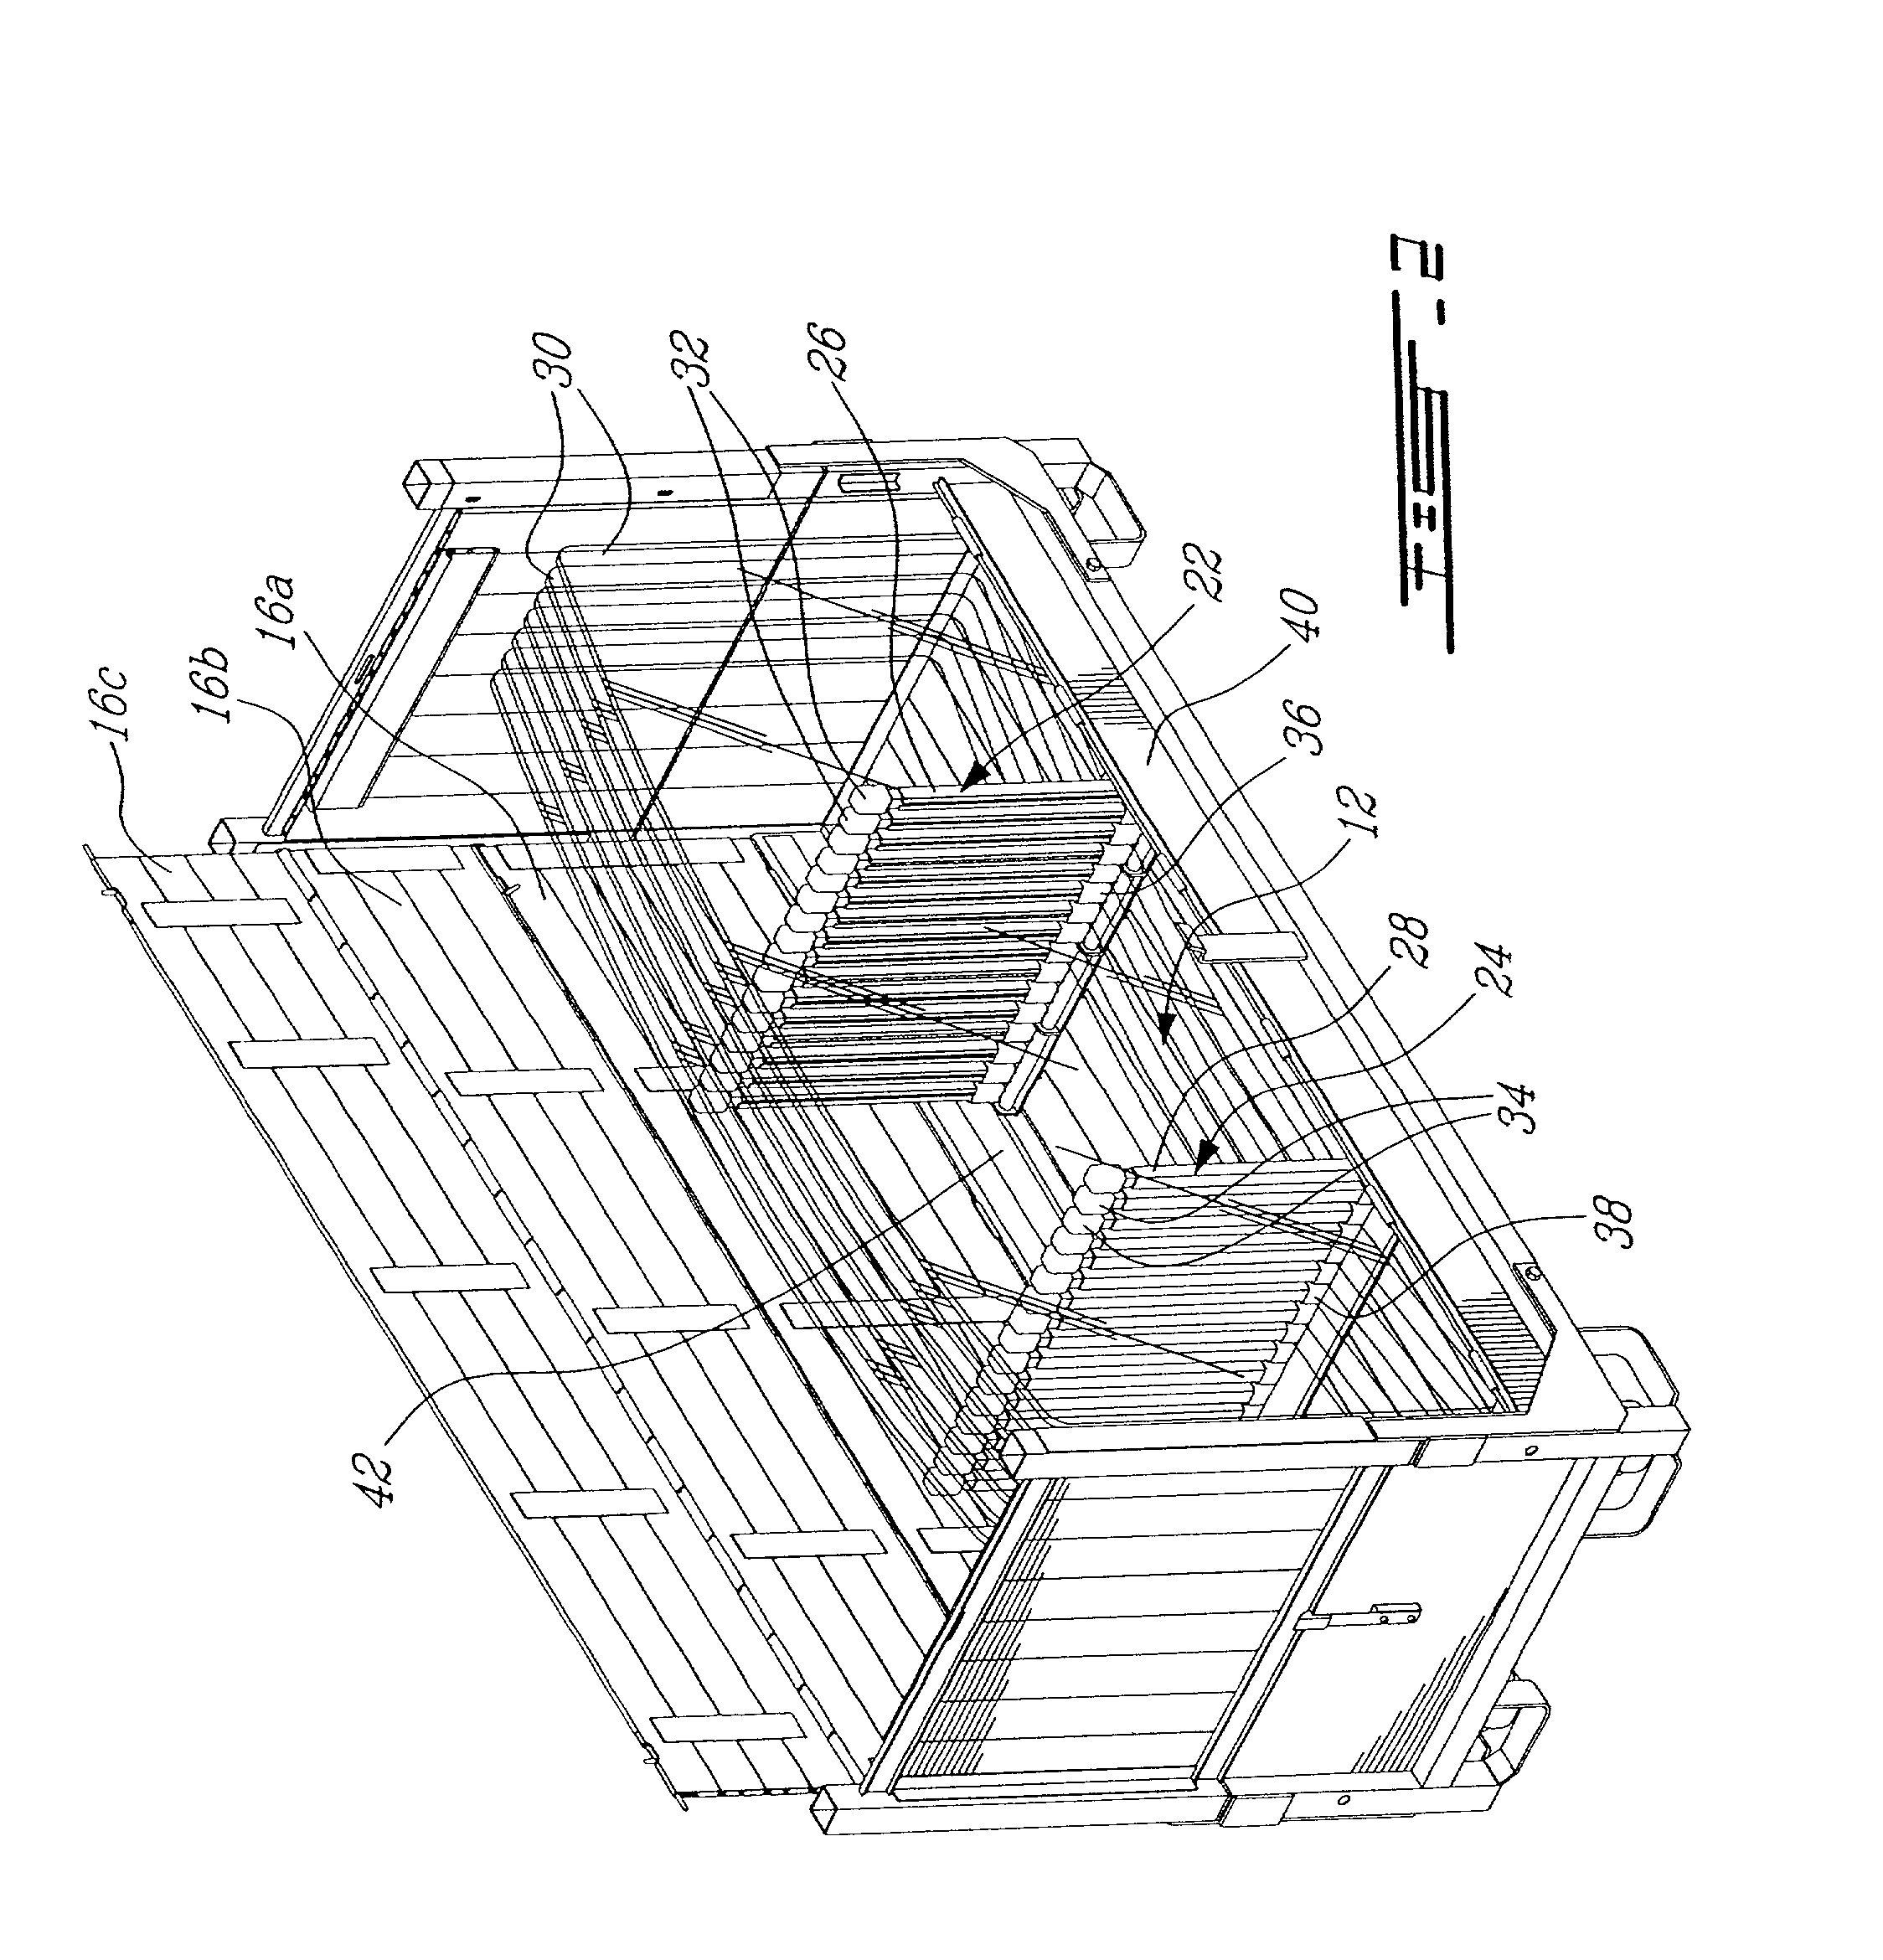 Crate for carrying glass panels